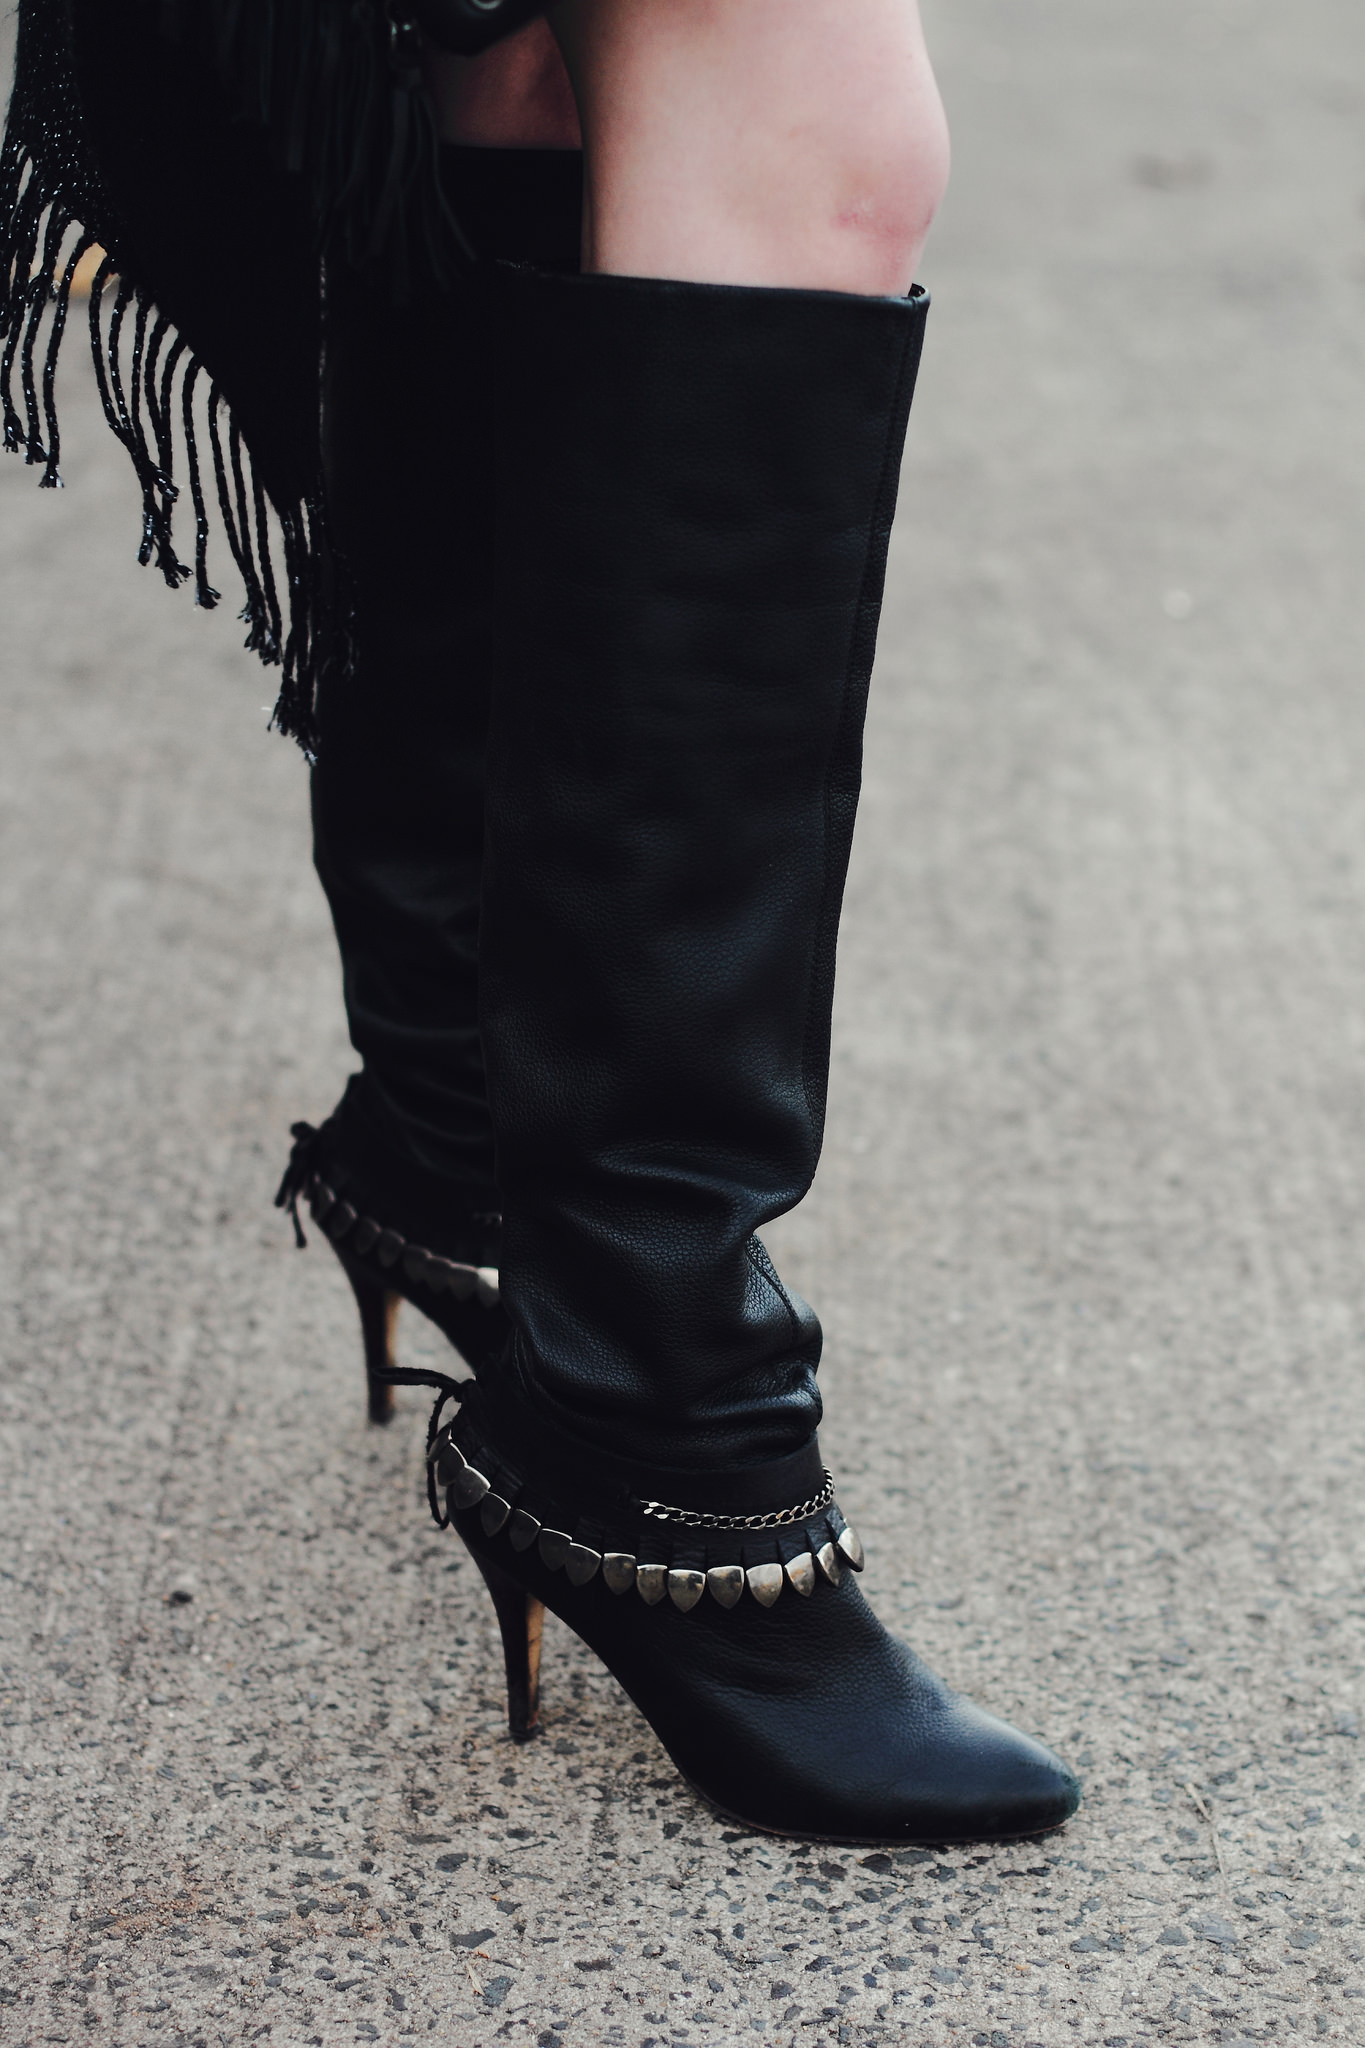 fringe shawl and over the knee boots